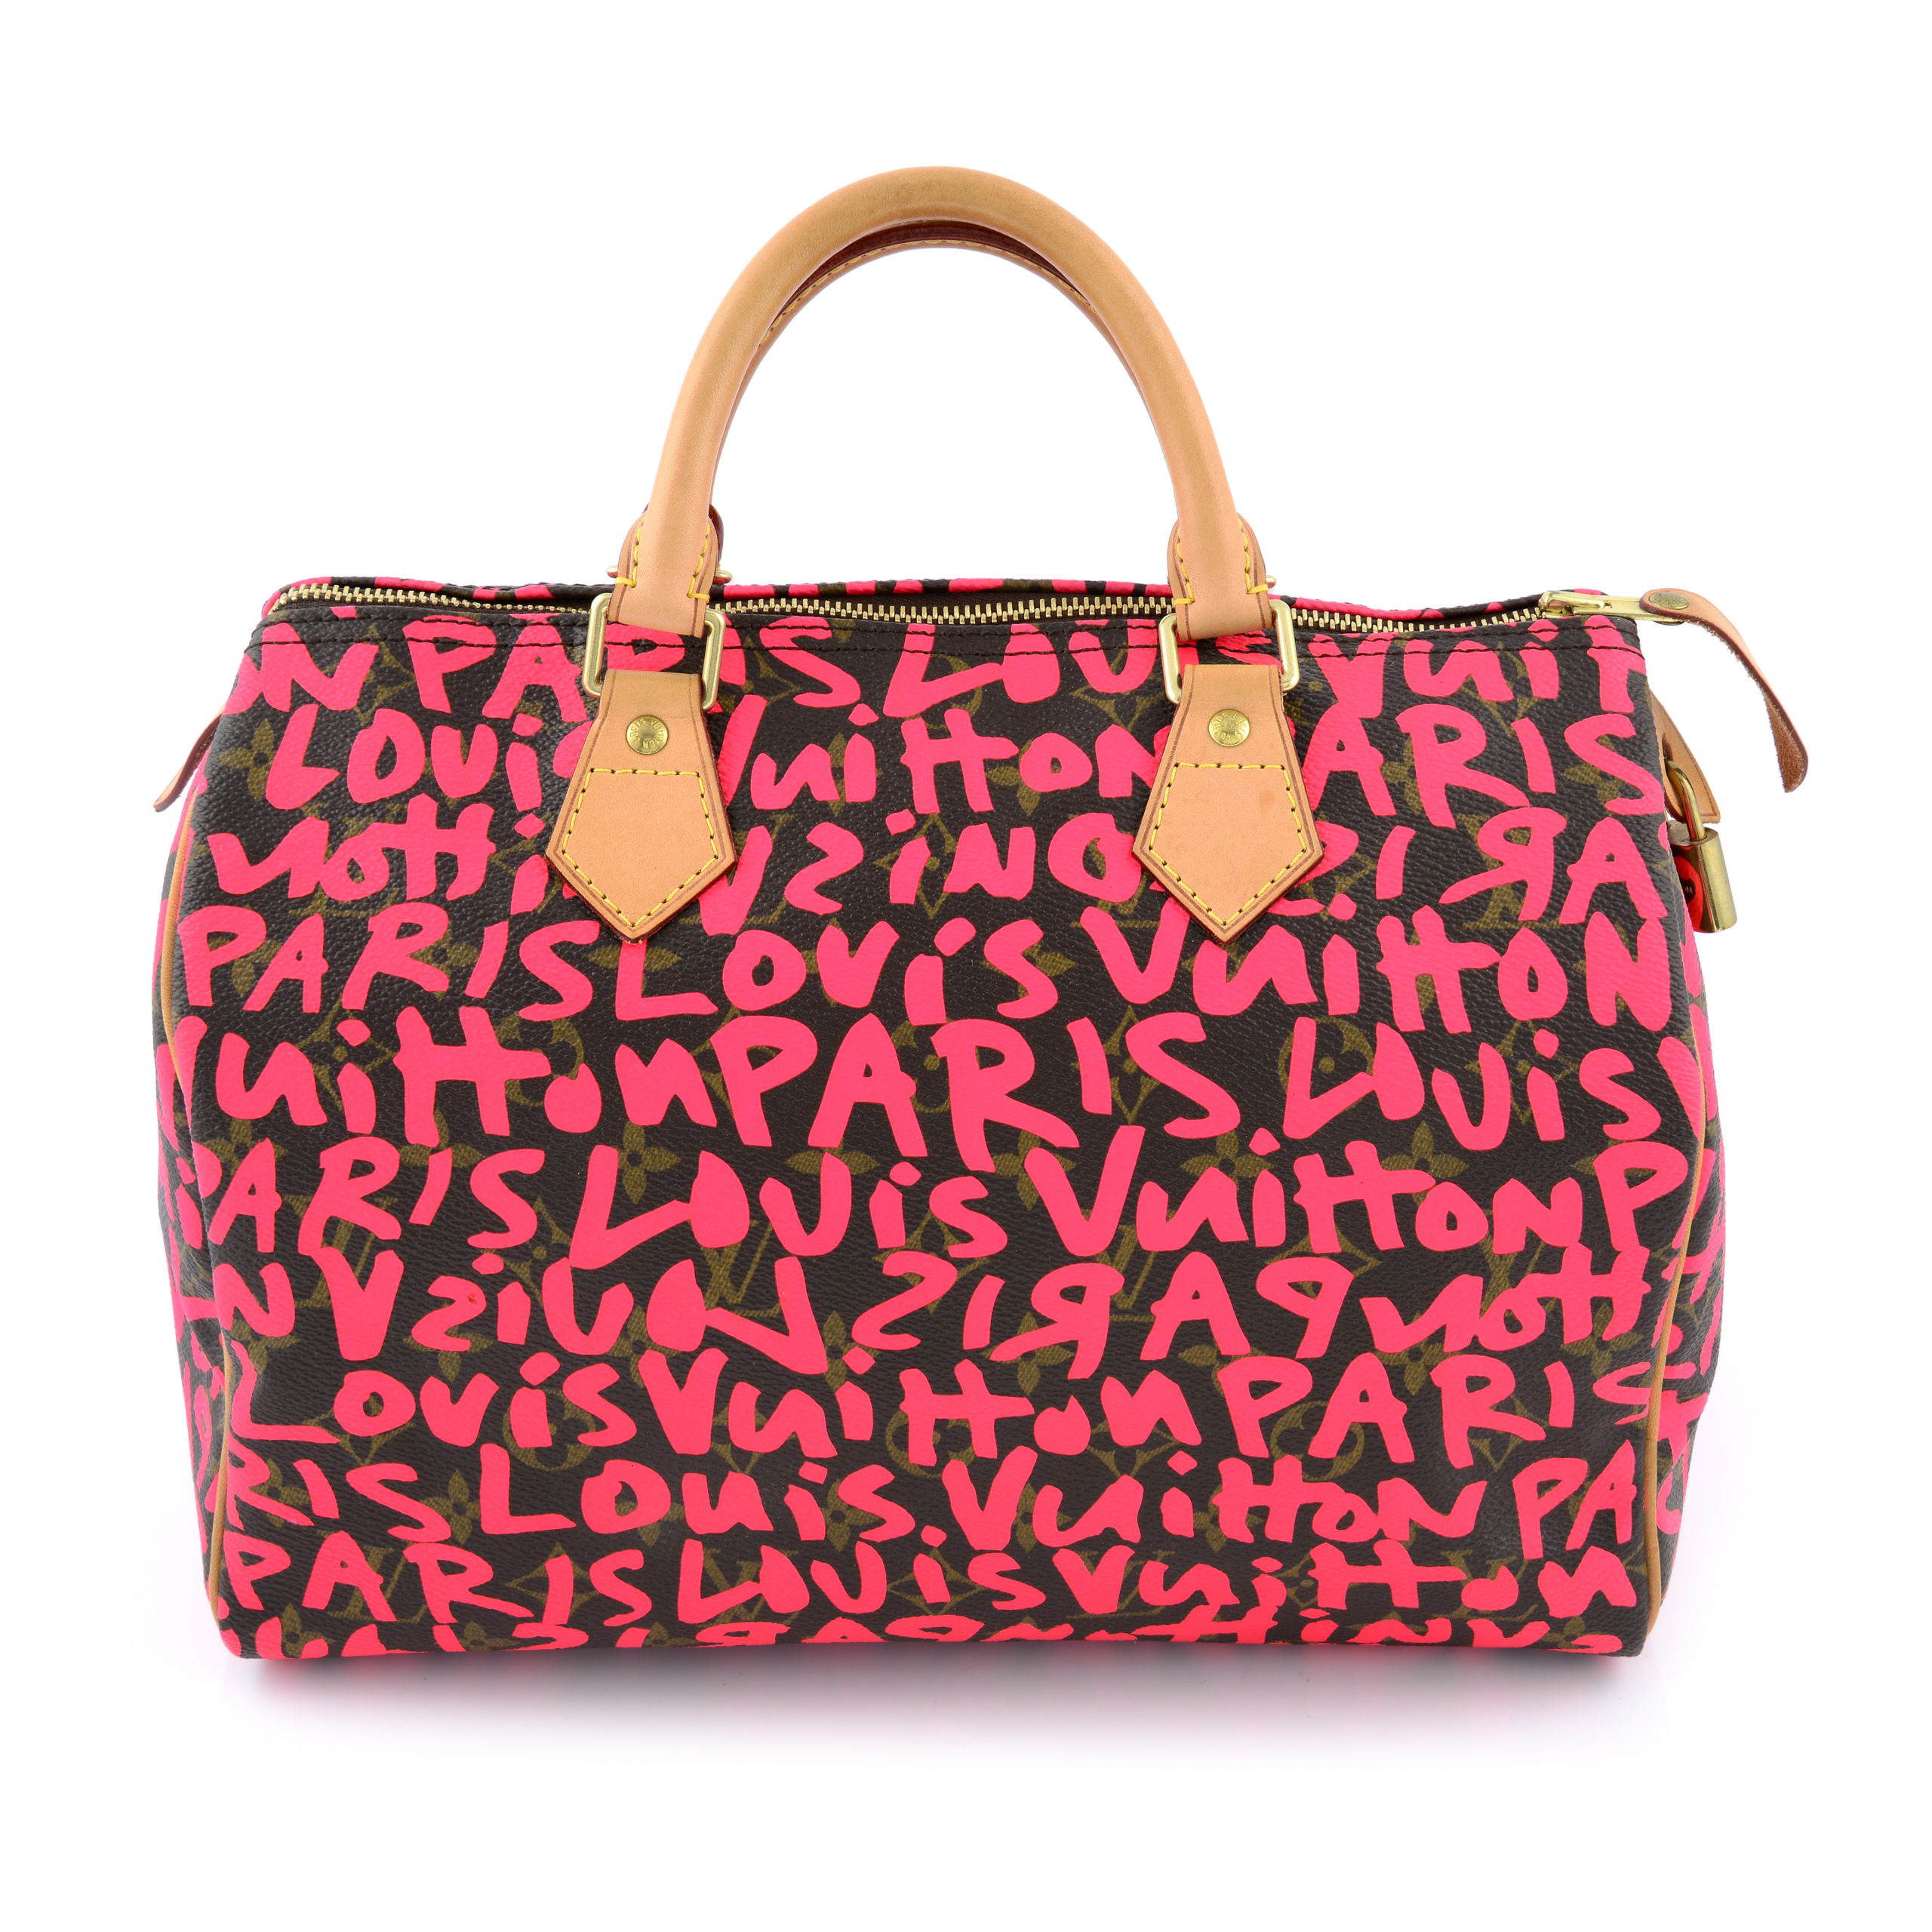 Louis Vuitton's Stephen Sprouse Collab Was (and Is) the Brand's